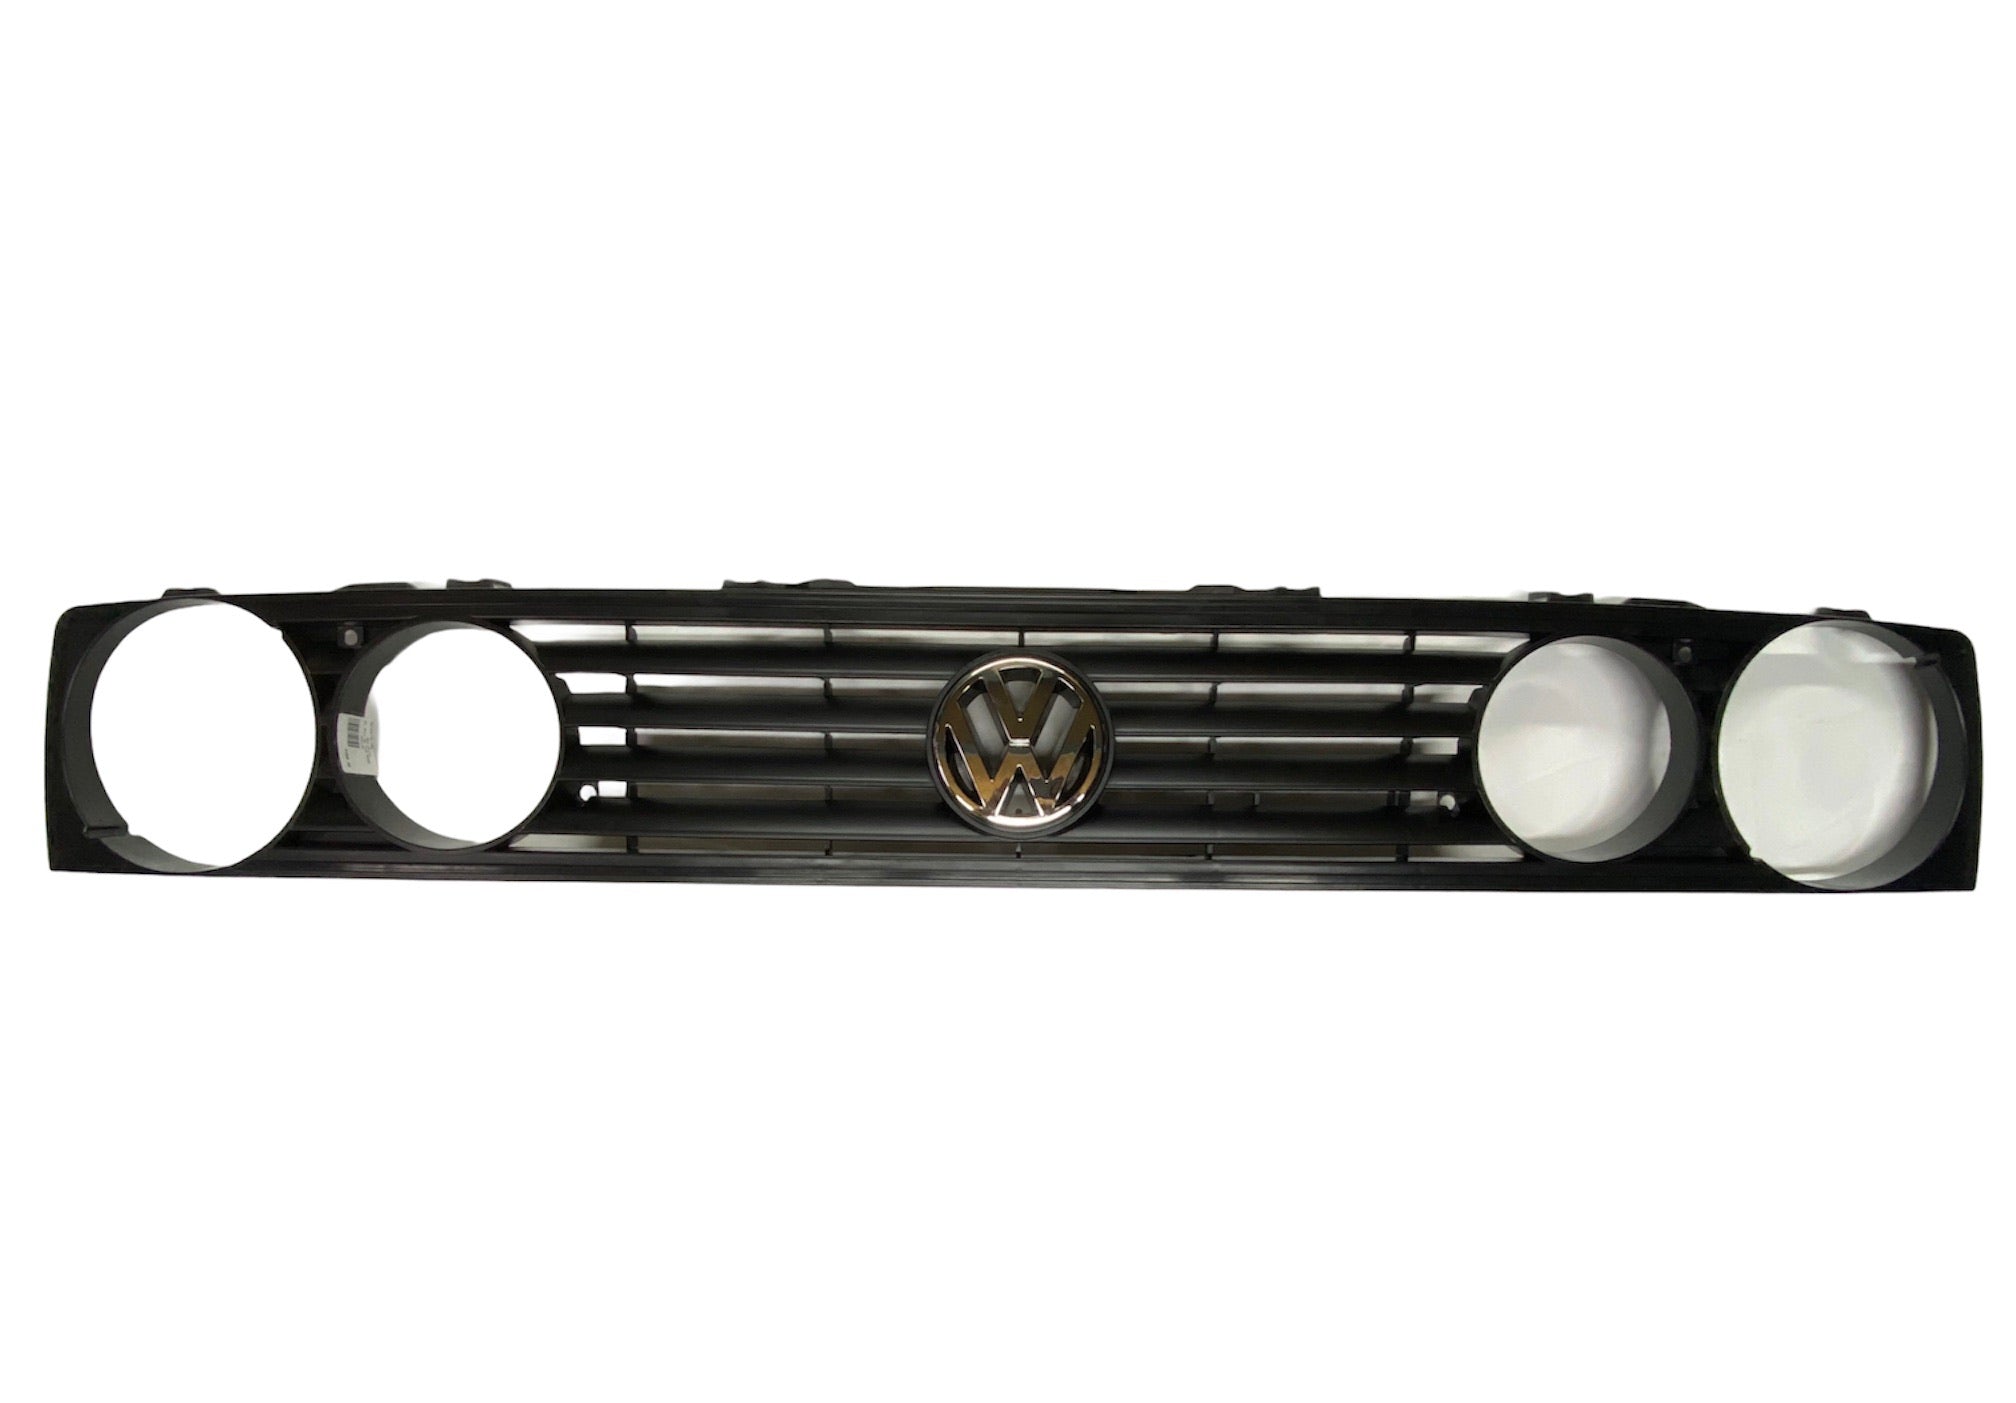 VW GOLF MK1 DOUBLE WITH BADGE GRILL